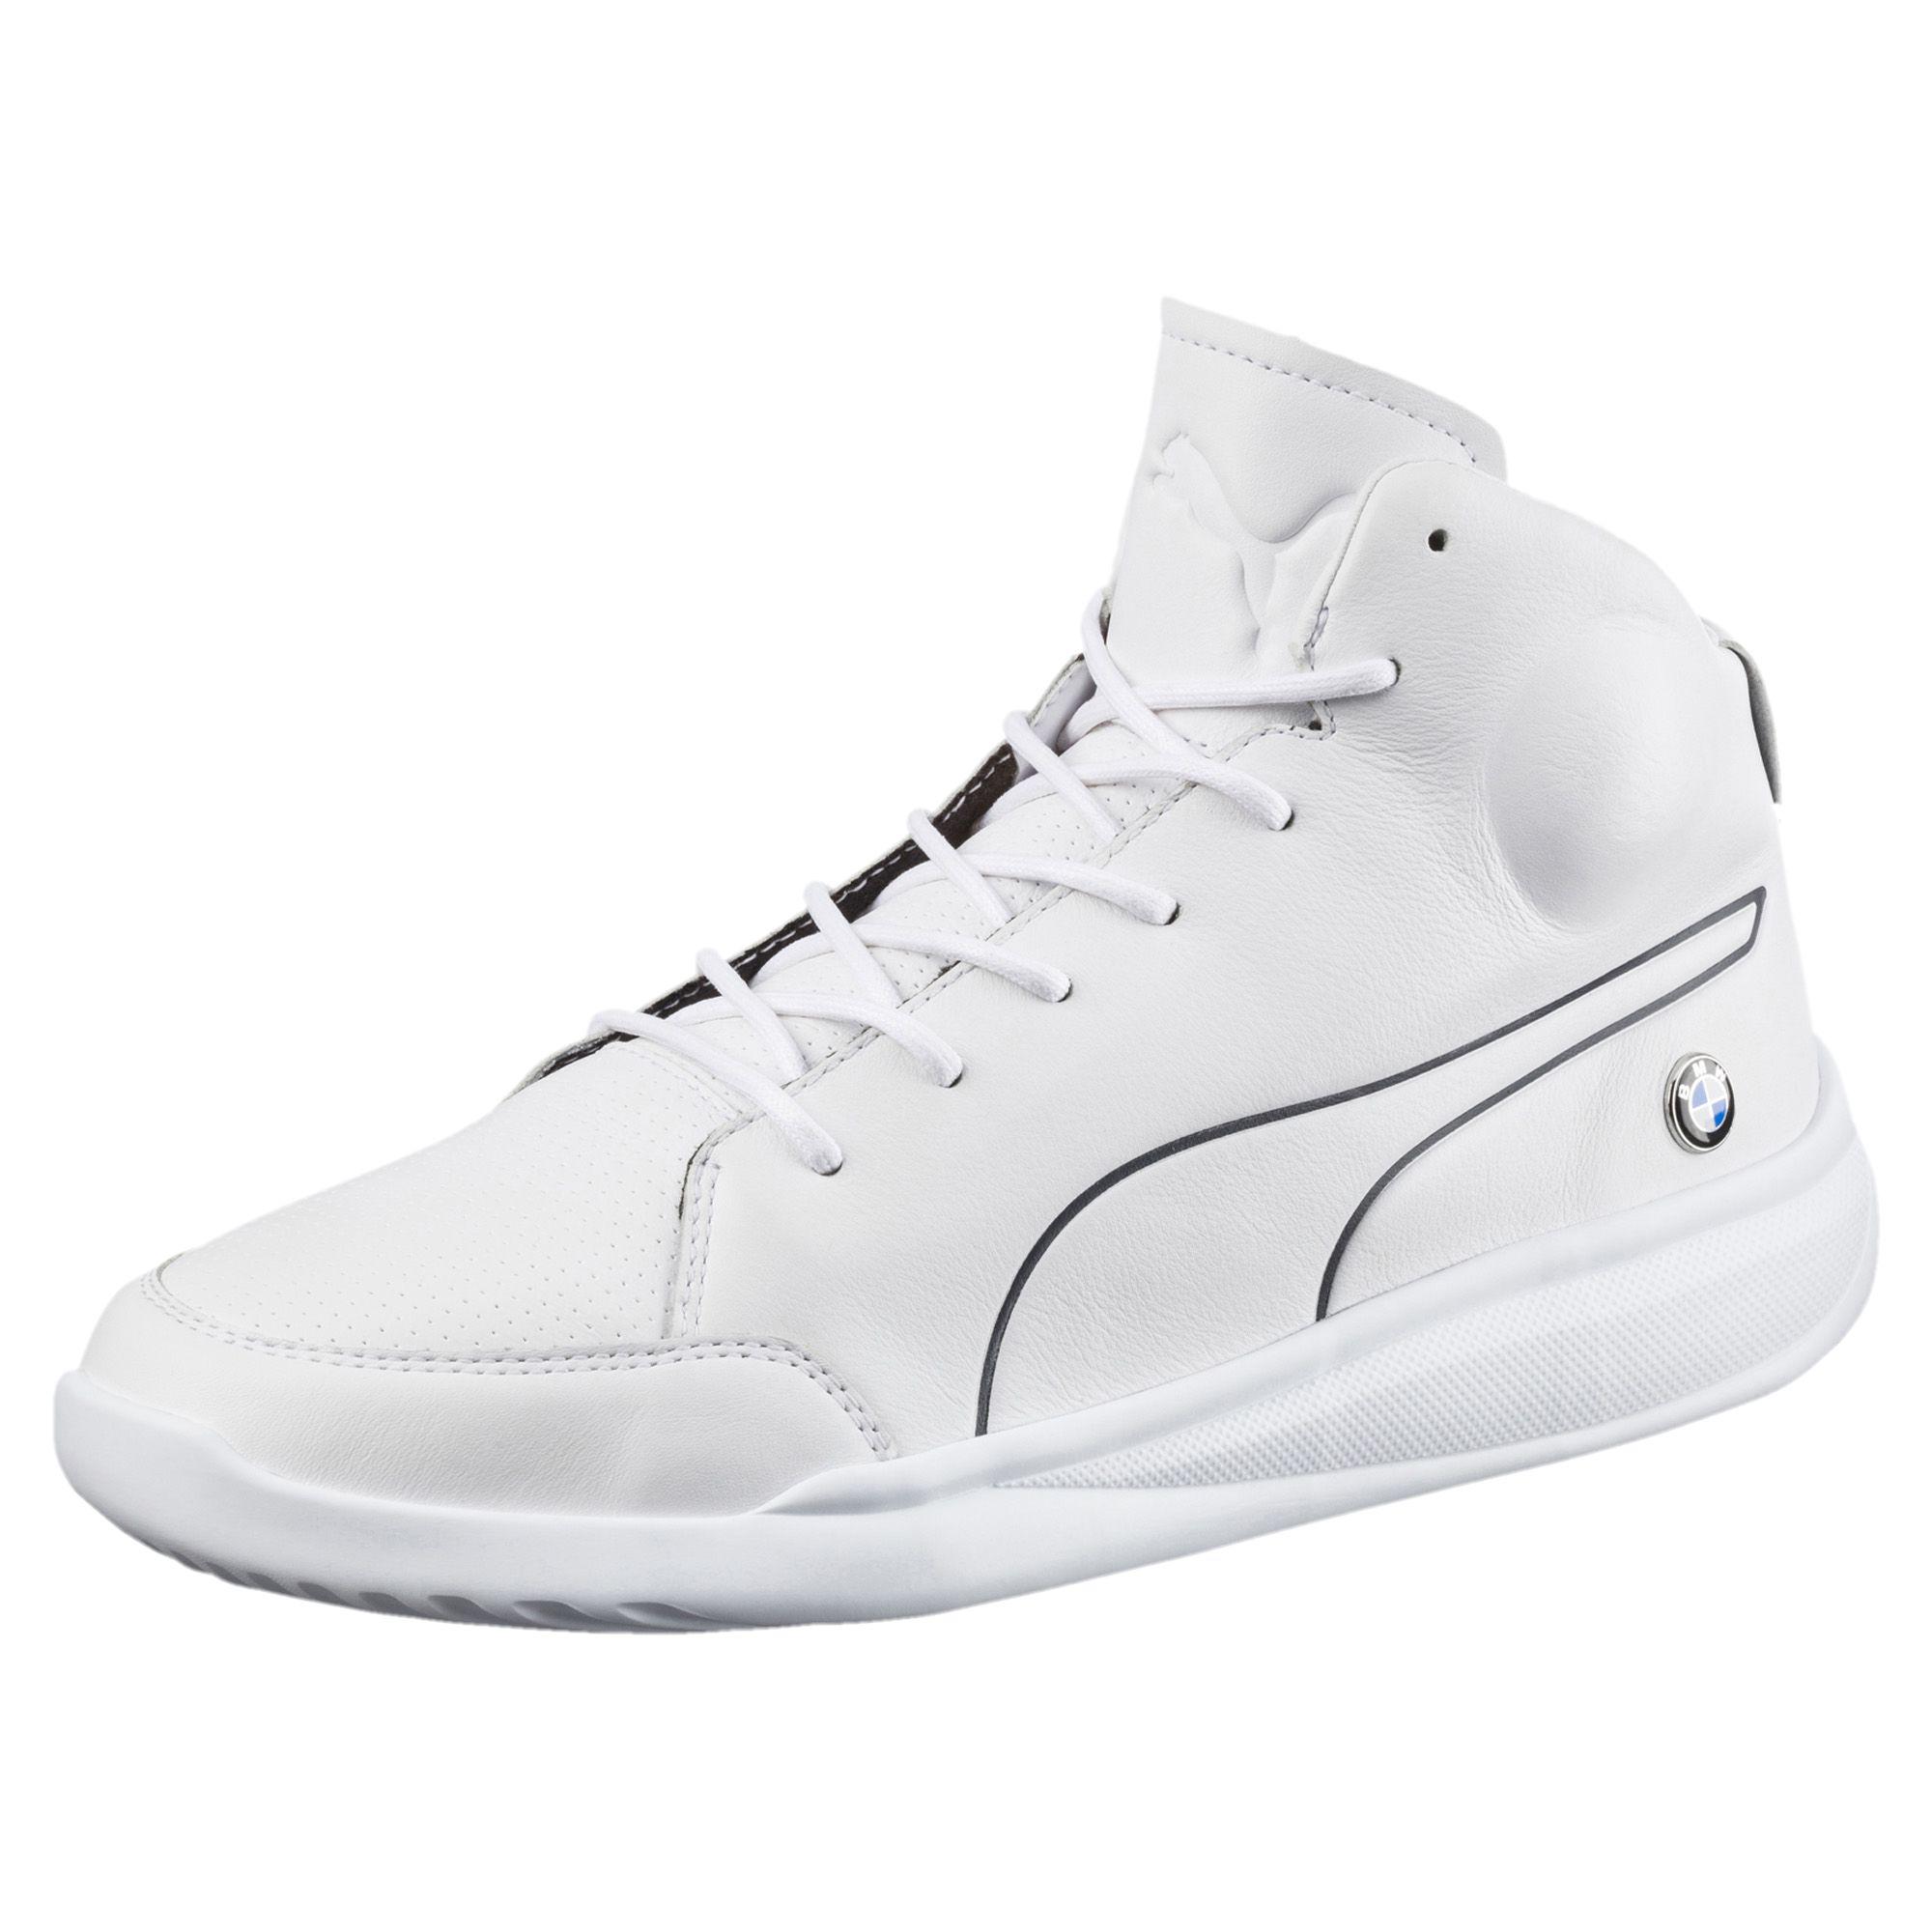 PUMA Bmw Motorsport Casual Mid Men's High Top Sneajkers in White for Men |  Lyst